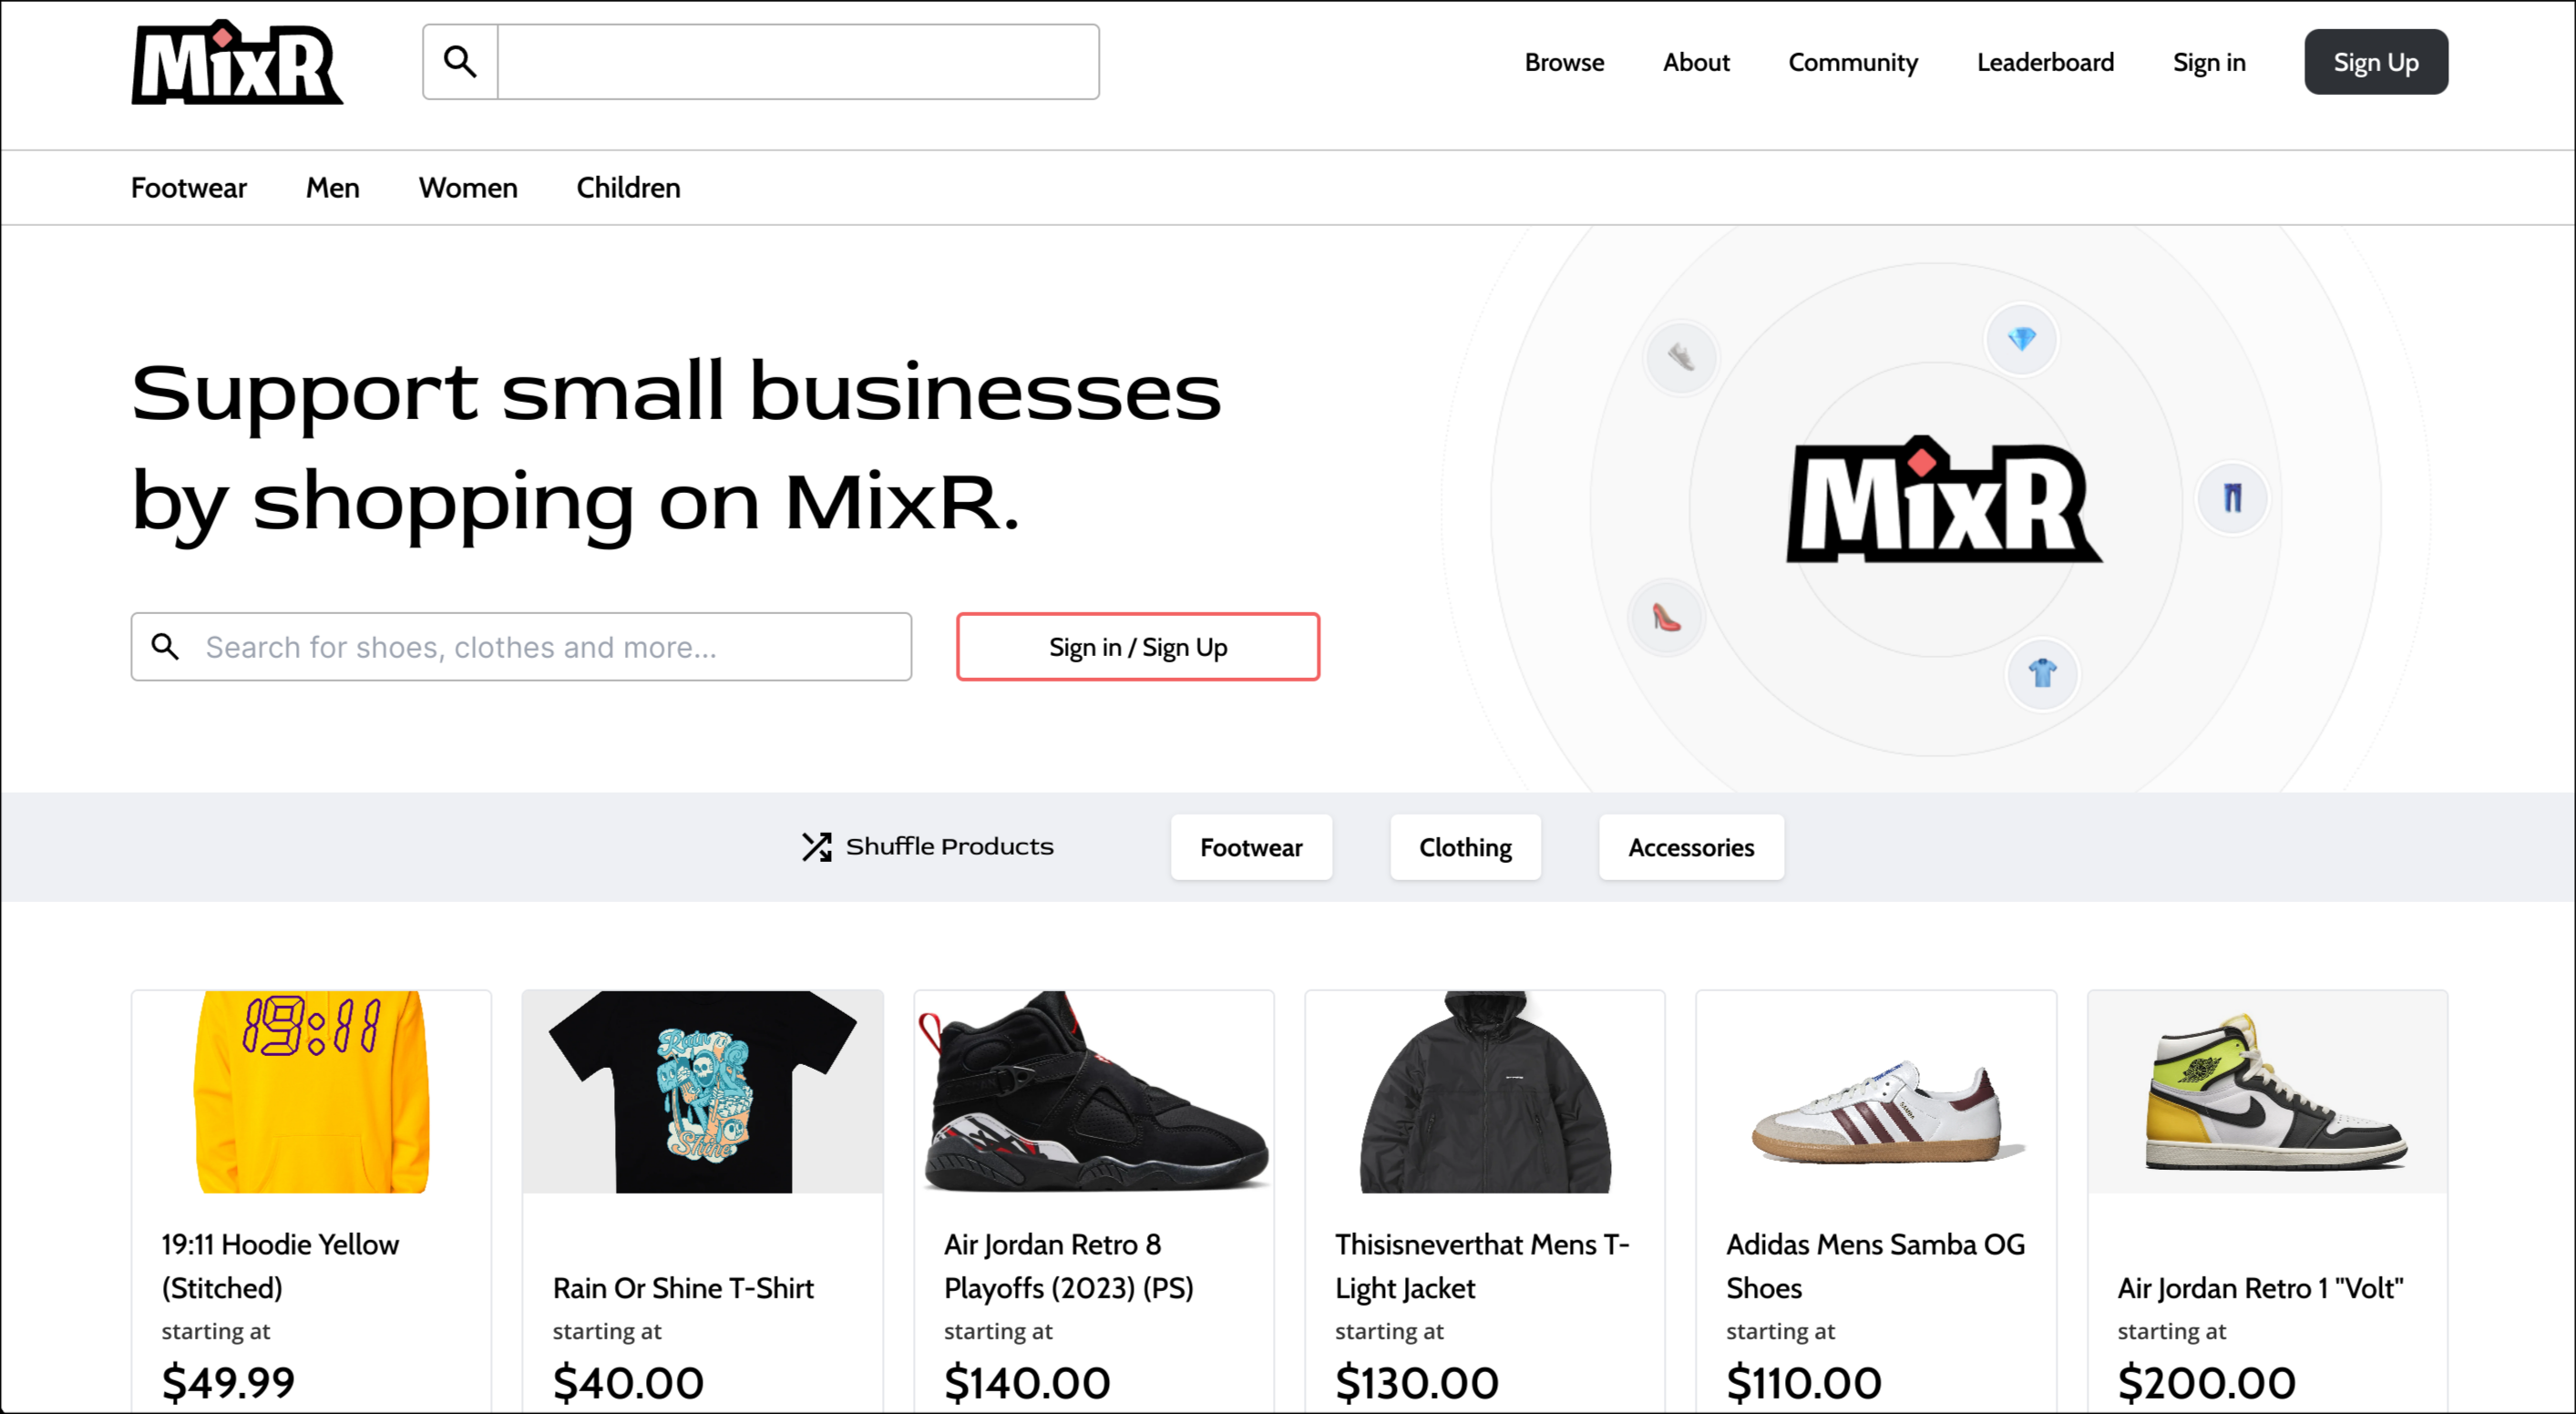 MixR - A Community first Marketplace